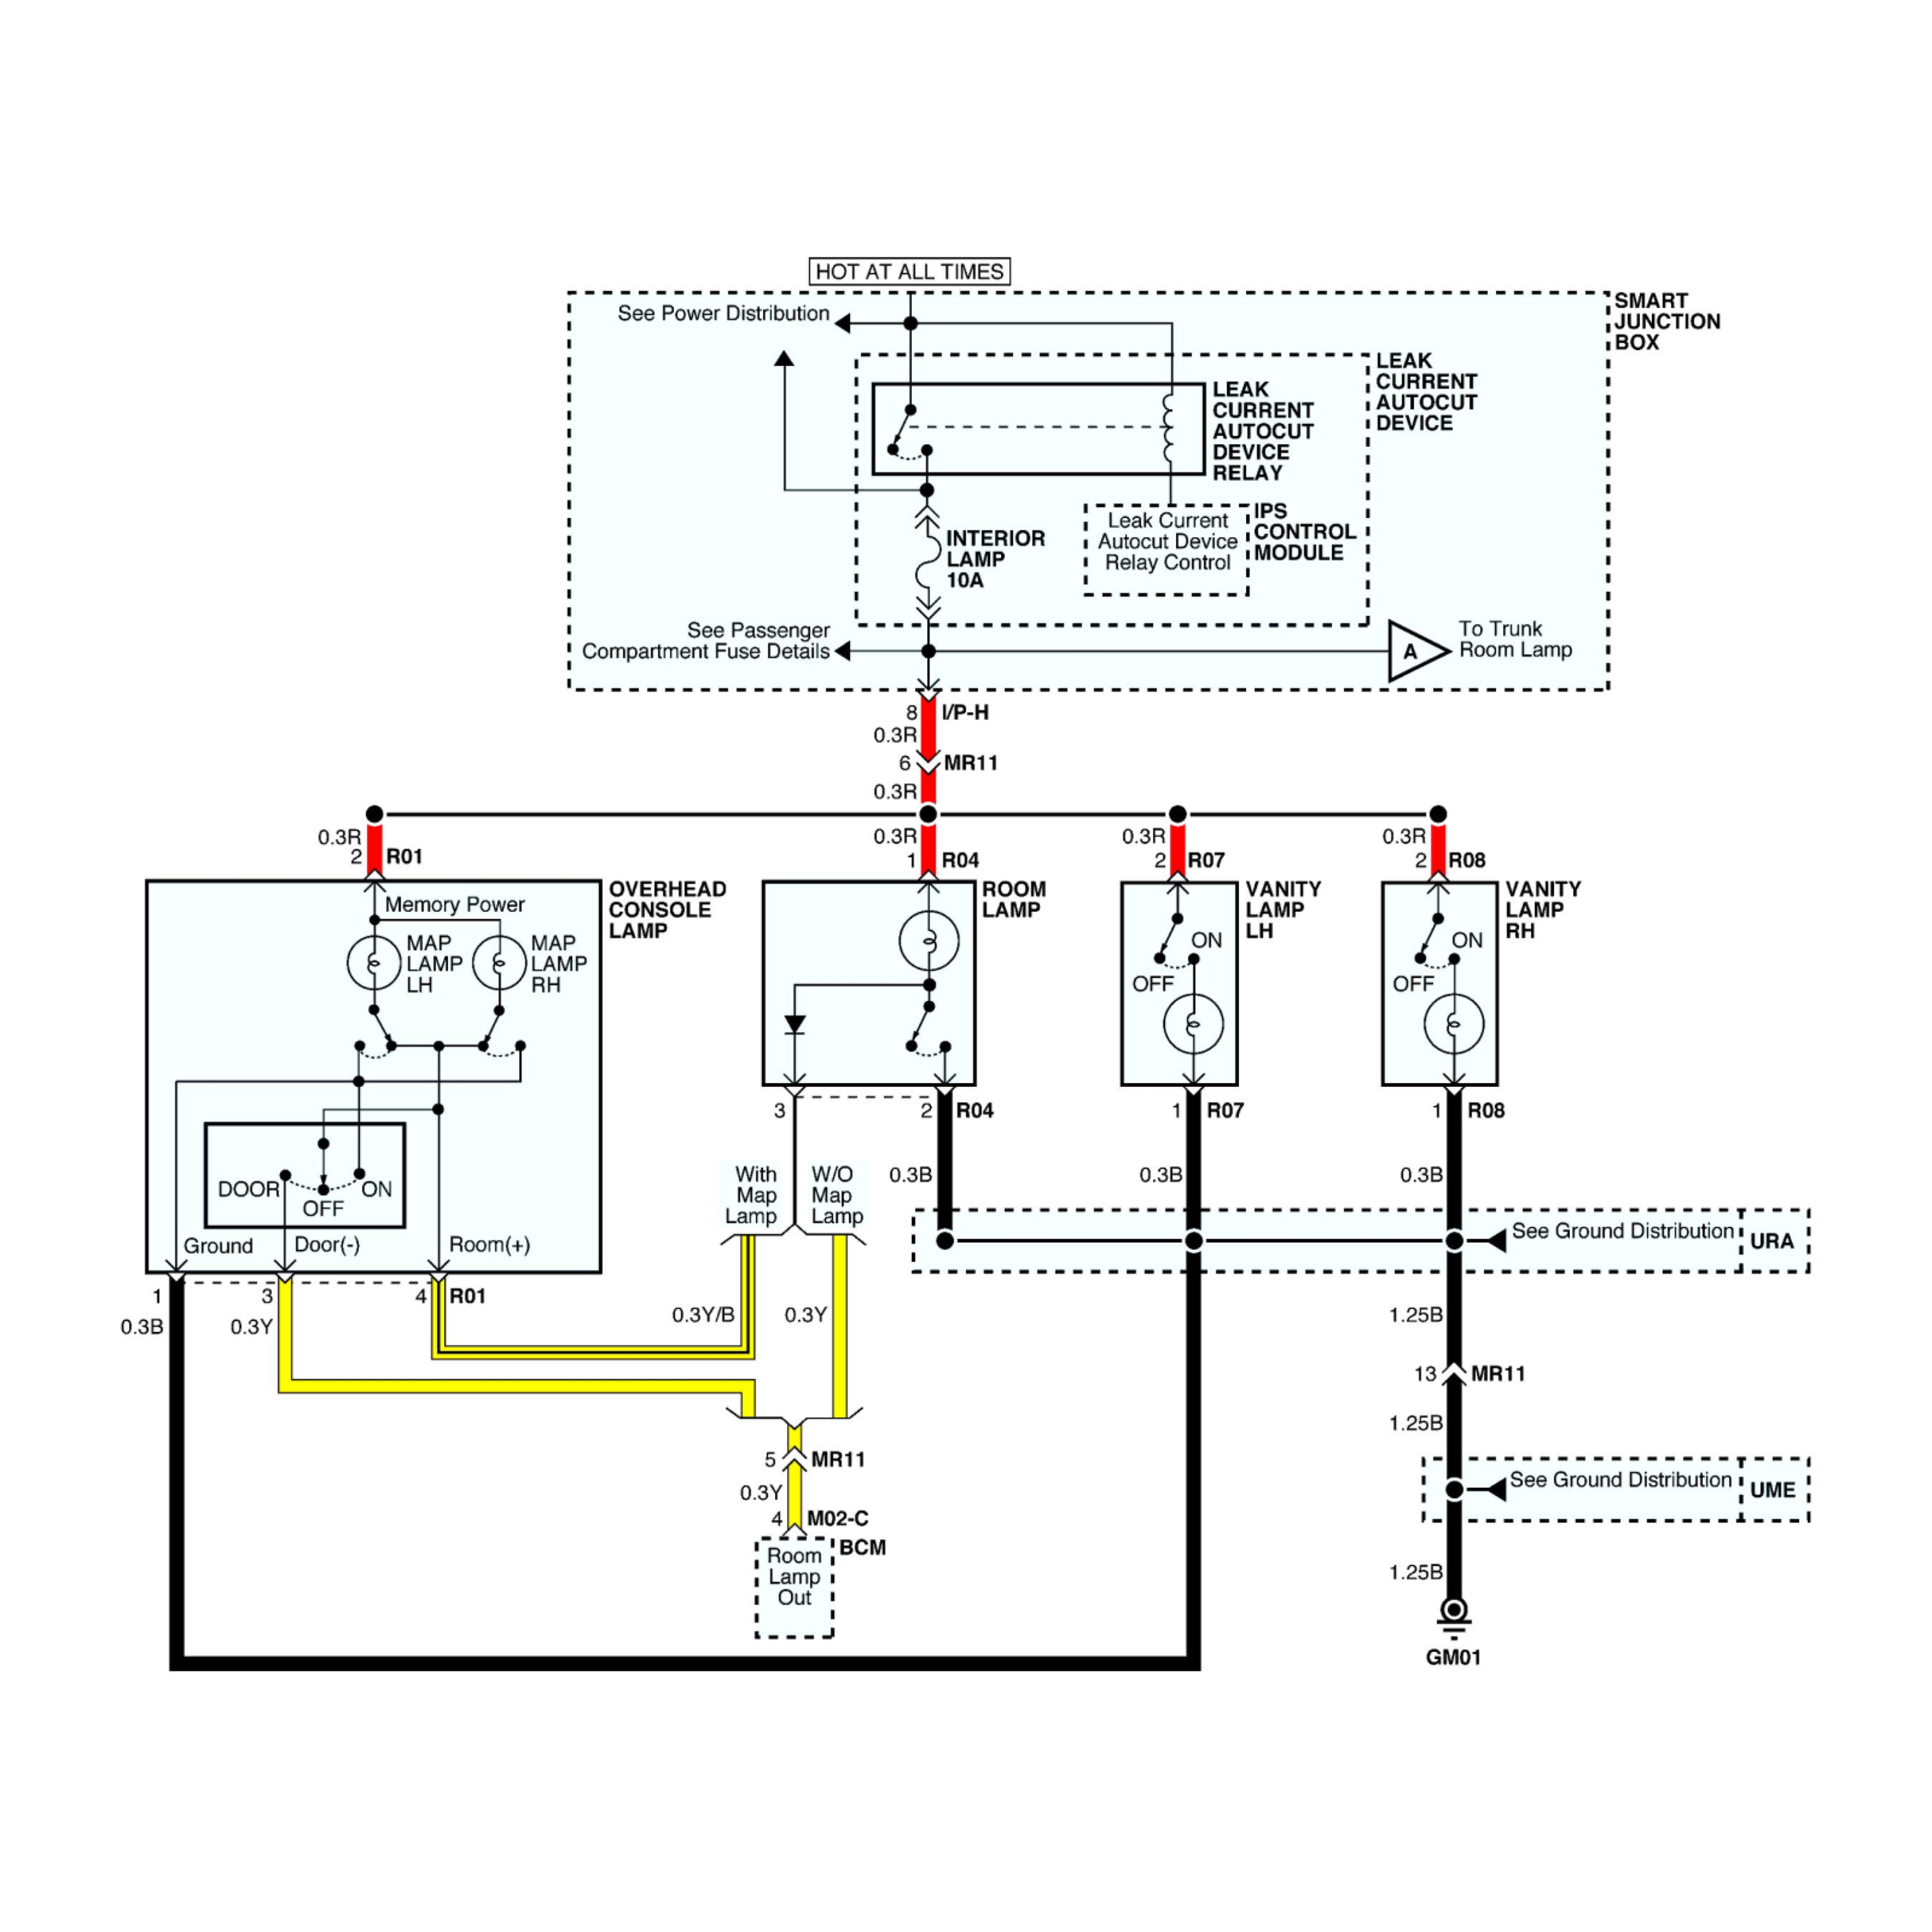 2012 BMW 650i wiring diagrams example